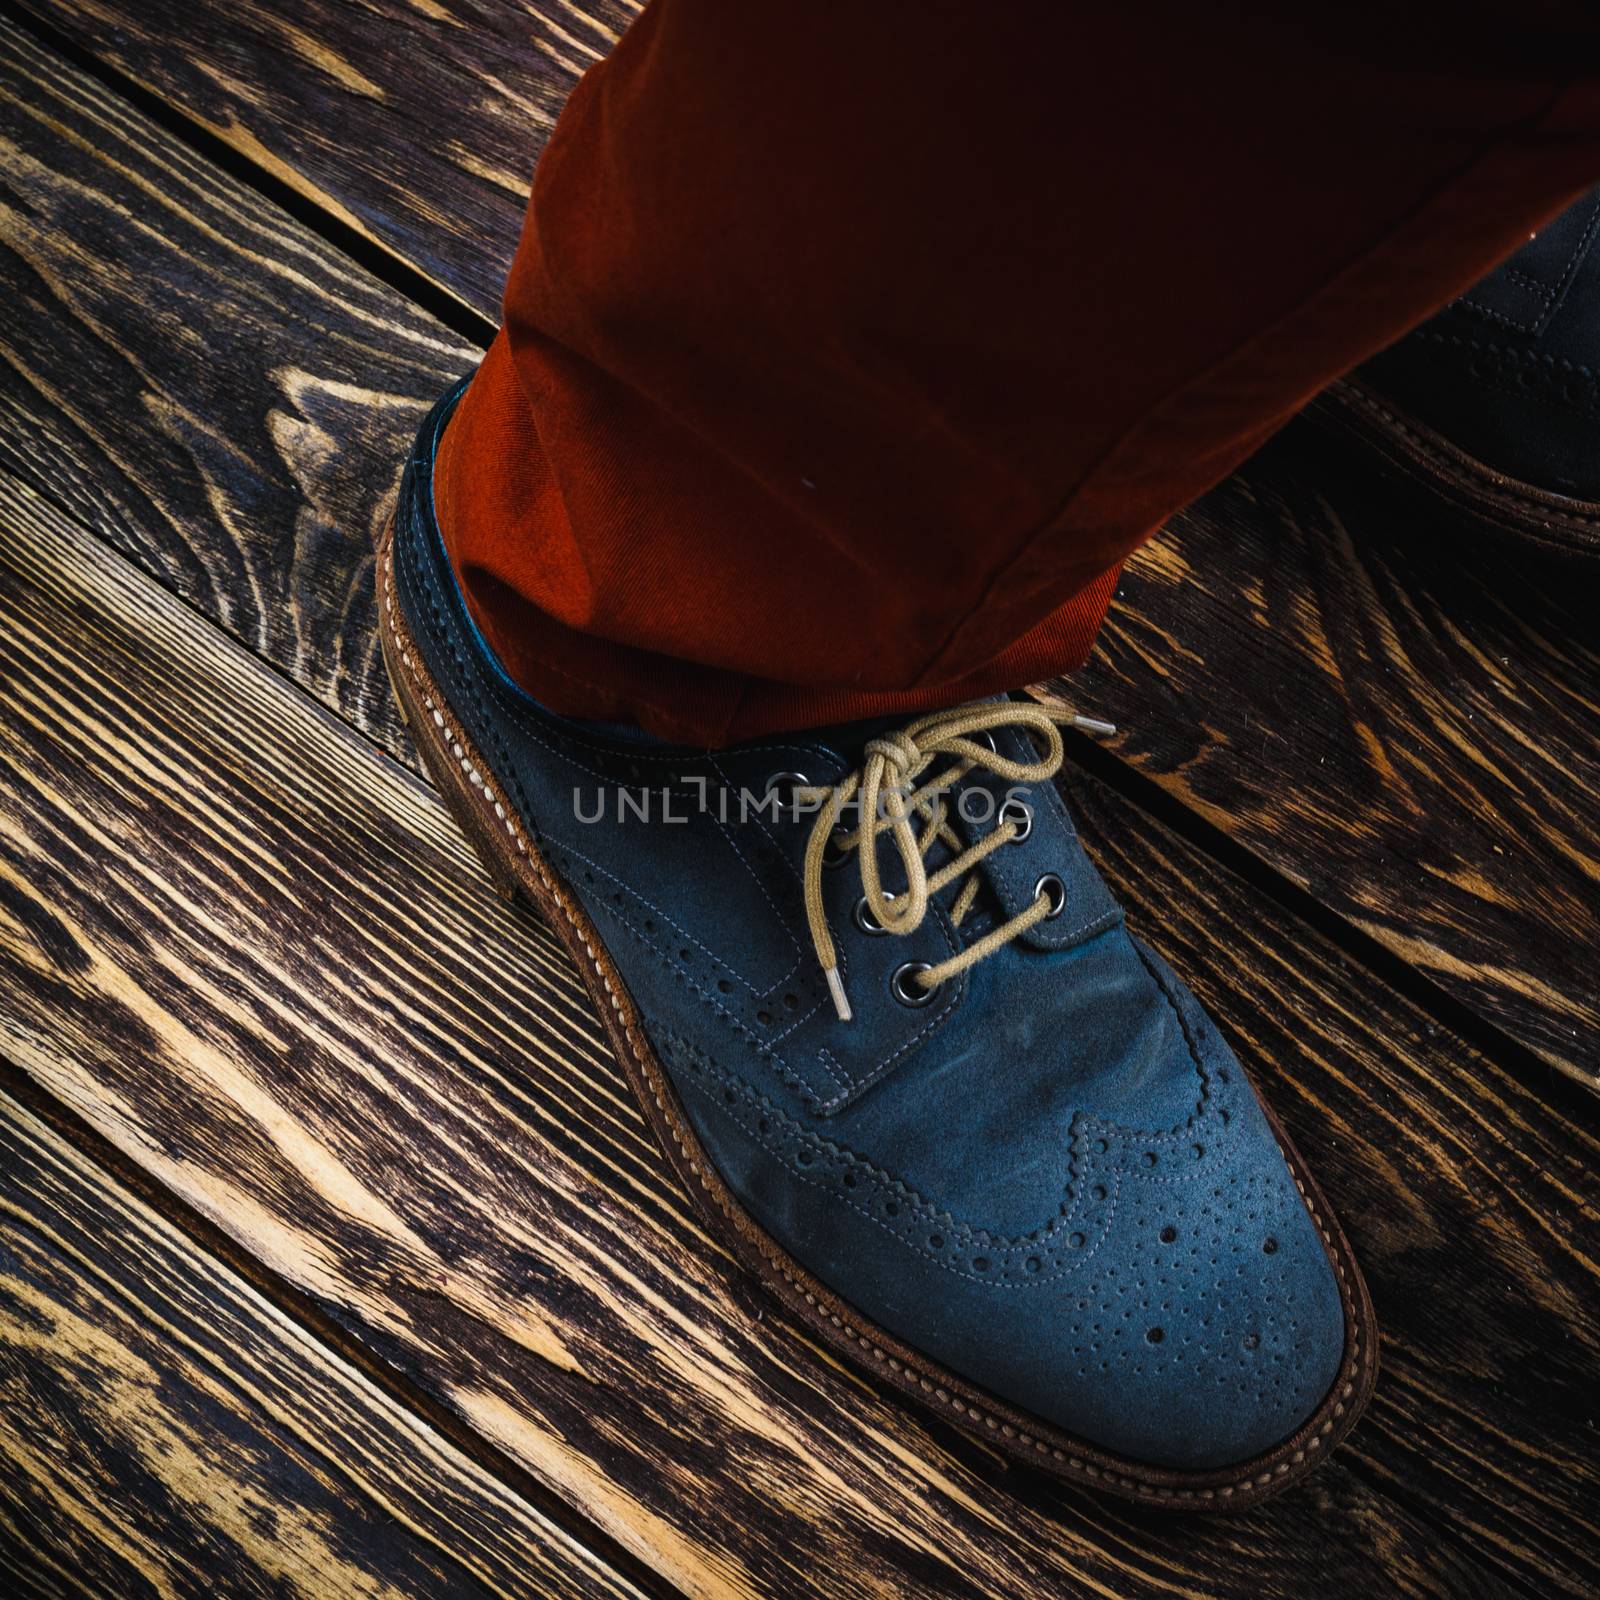 Close up of men's brogues (also known as derbies,gibsons or wingtips) made from blue oiled suede.